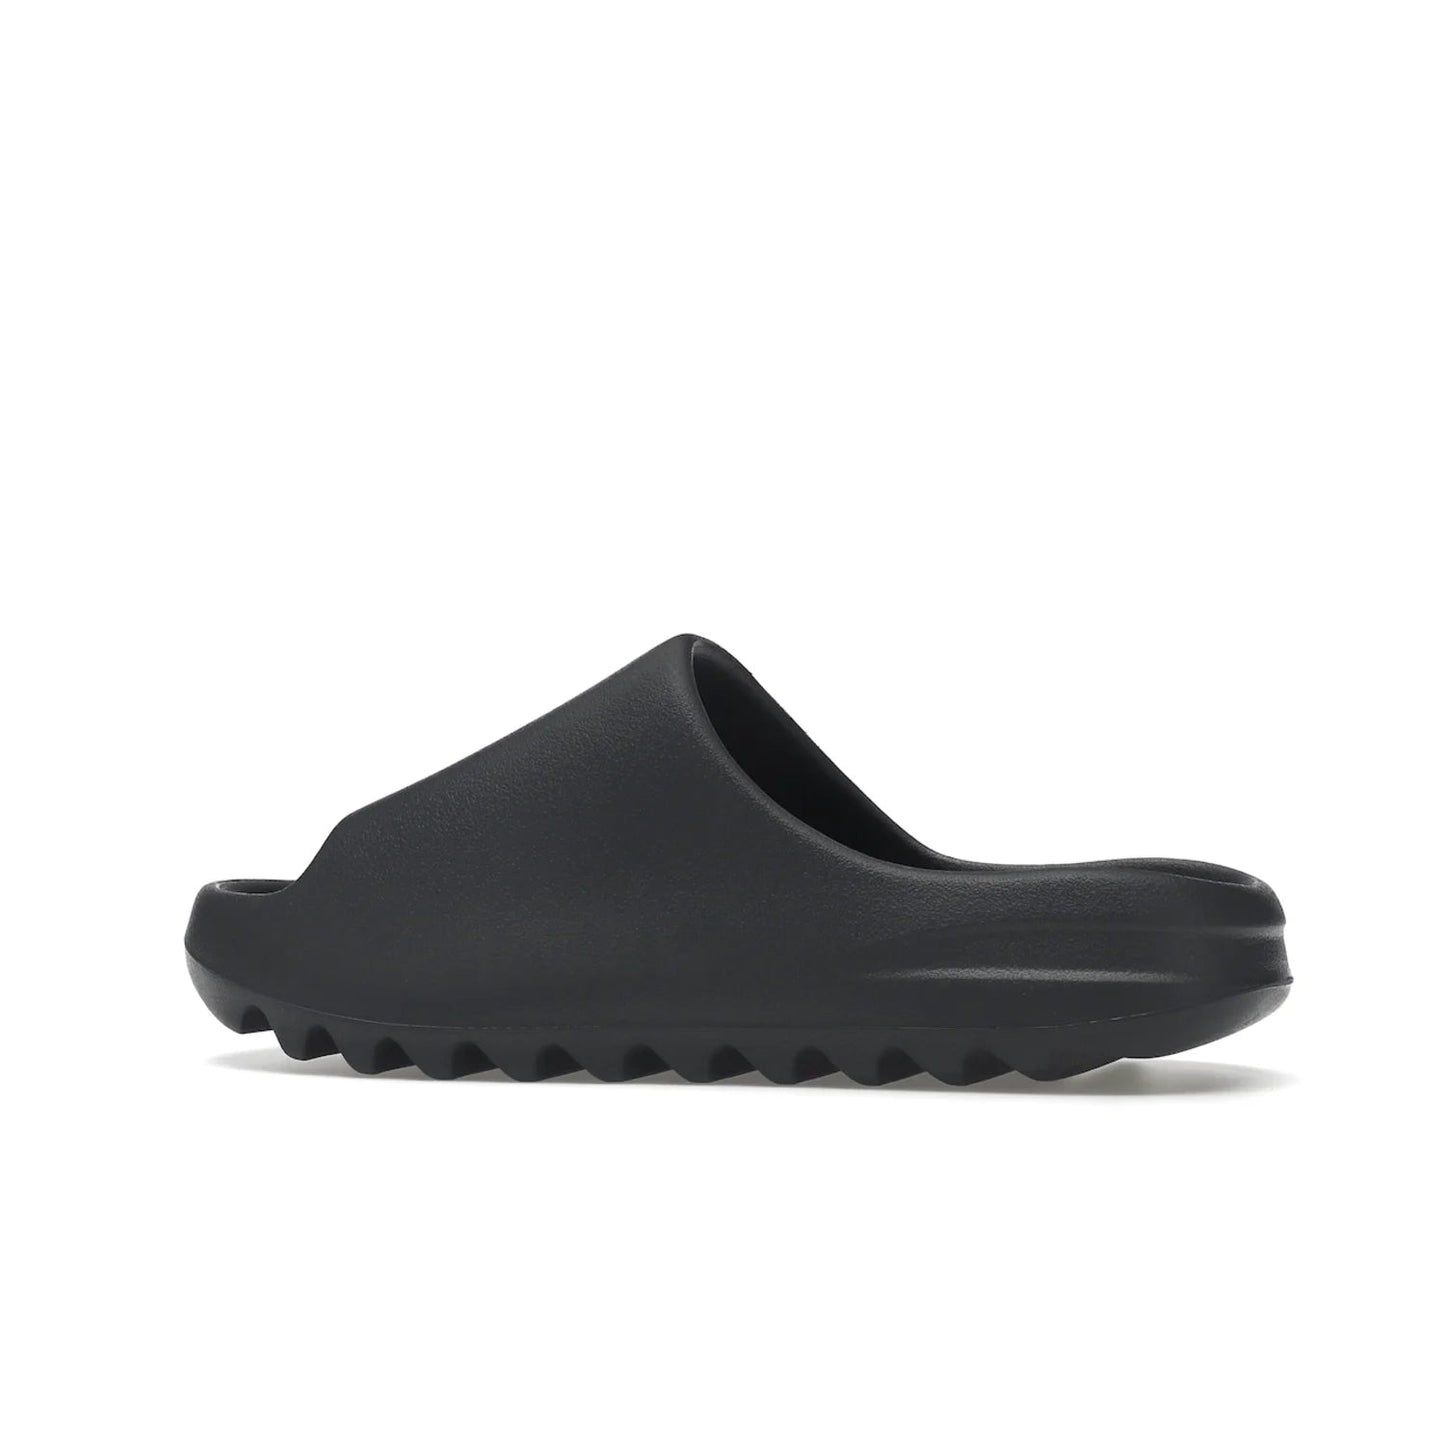 adidas Yeezy Slide Slate Grey - Image 21 - Only at www.BallersClubKickz.com - Stylish & comfortable adidas Yeezy Slide Slate Grey features an EVA foam upper, strategic cutouts, textured outsole pattern, & easy slip-on design for modern comfort & classic style.